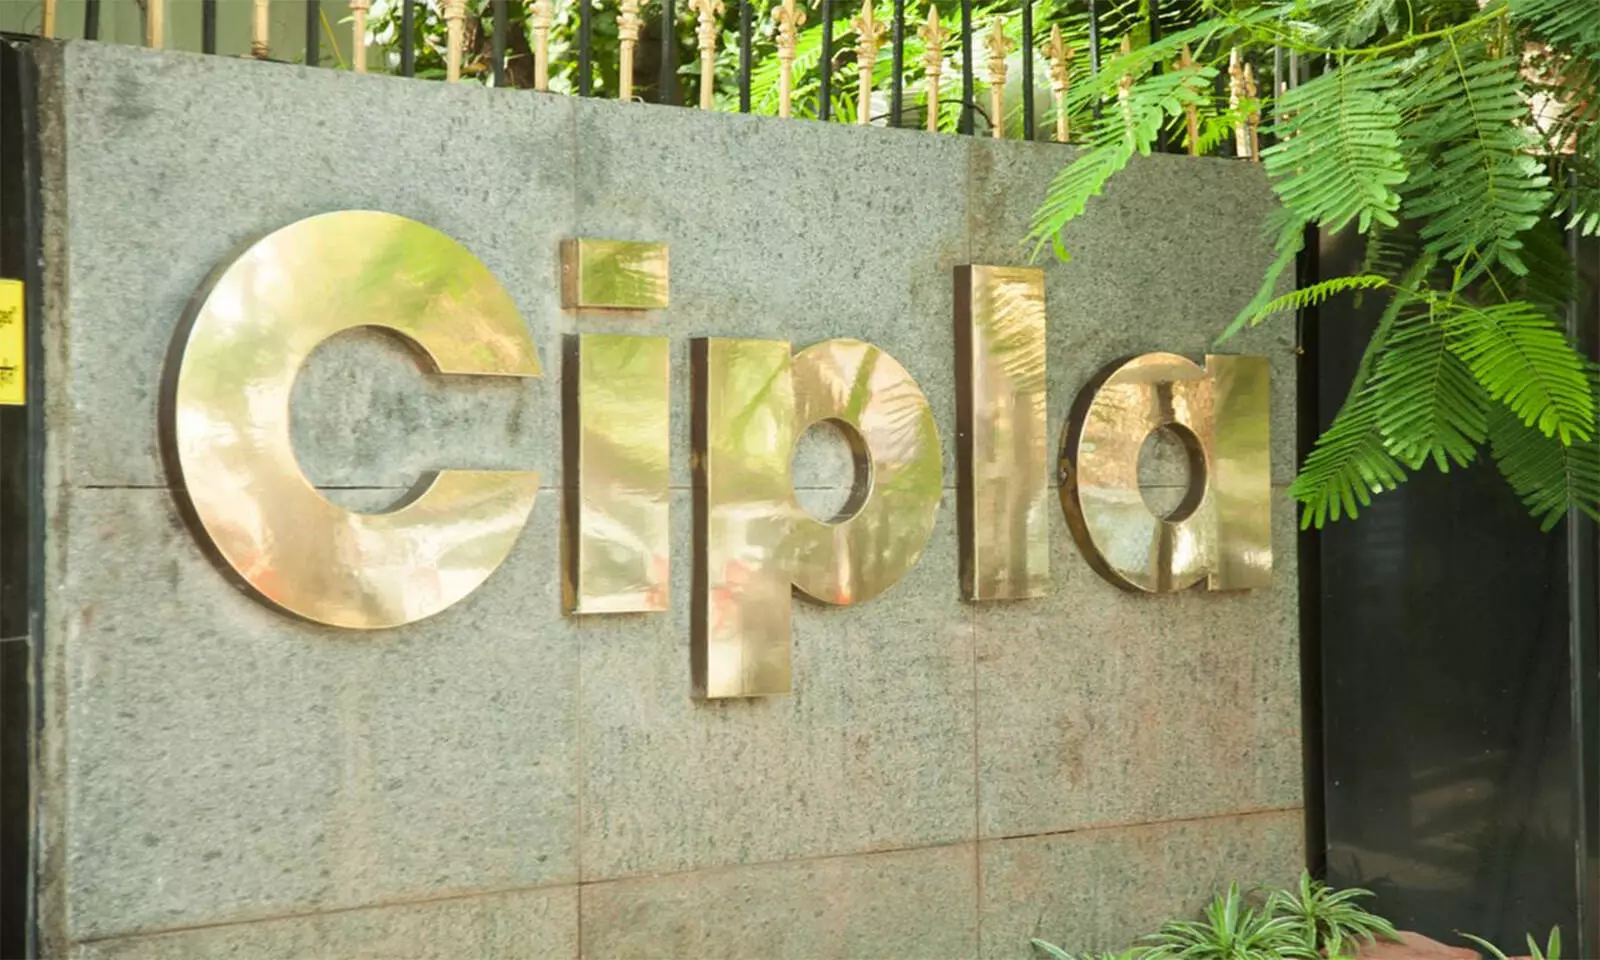 Cipla introduces RT-Direct multiplex COVID-19 RT PCR Test kit in India